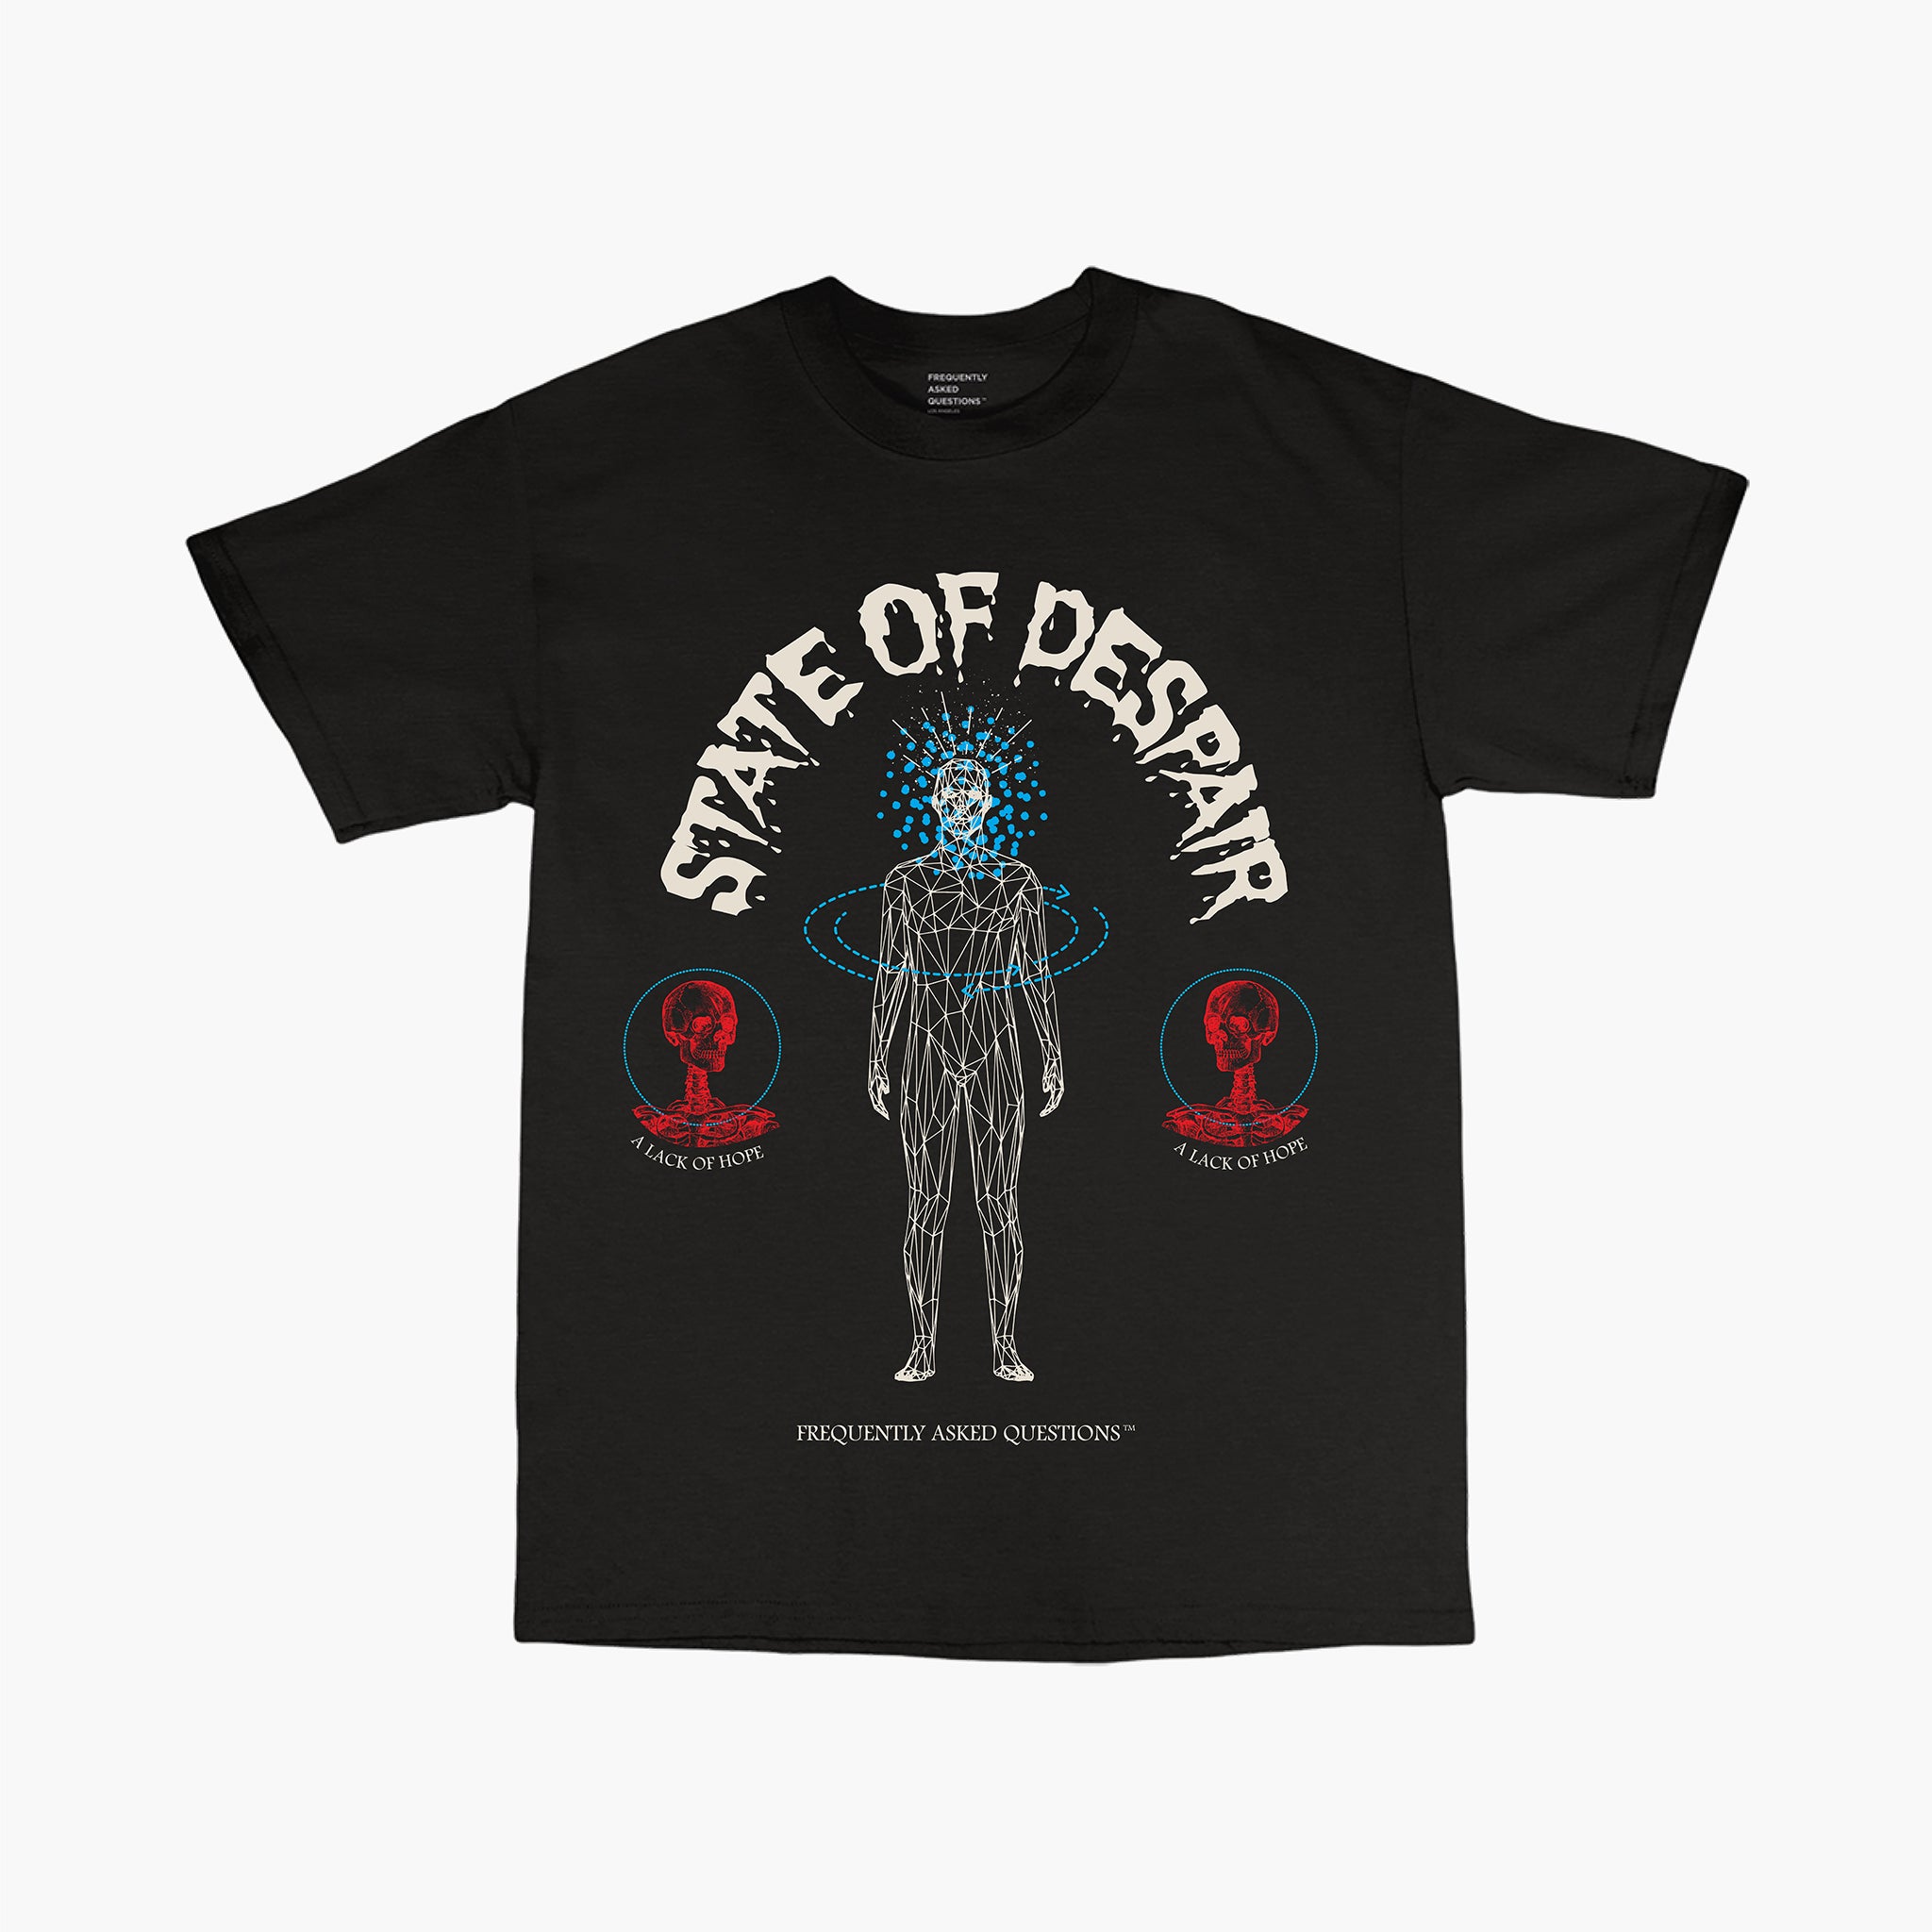 Despair T-Shirt - Frequently Asked Questions